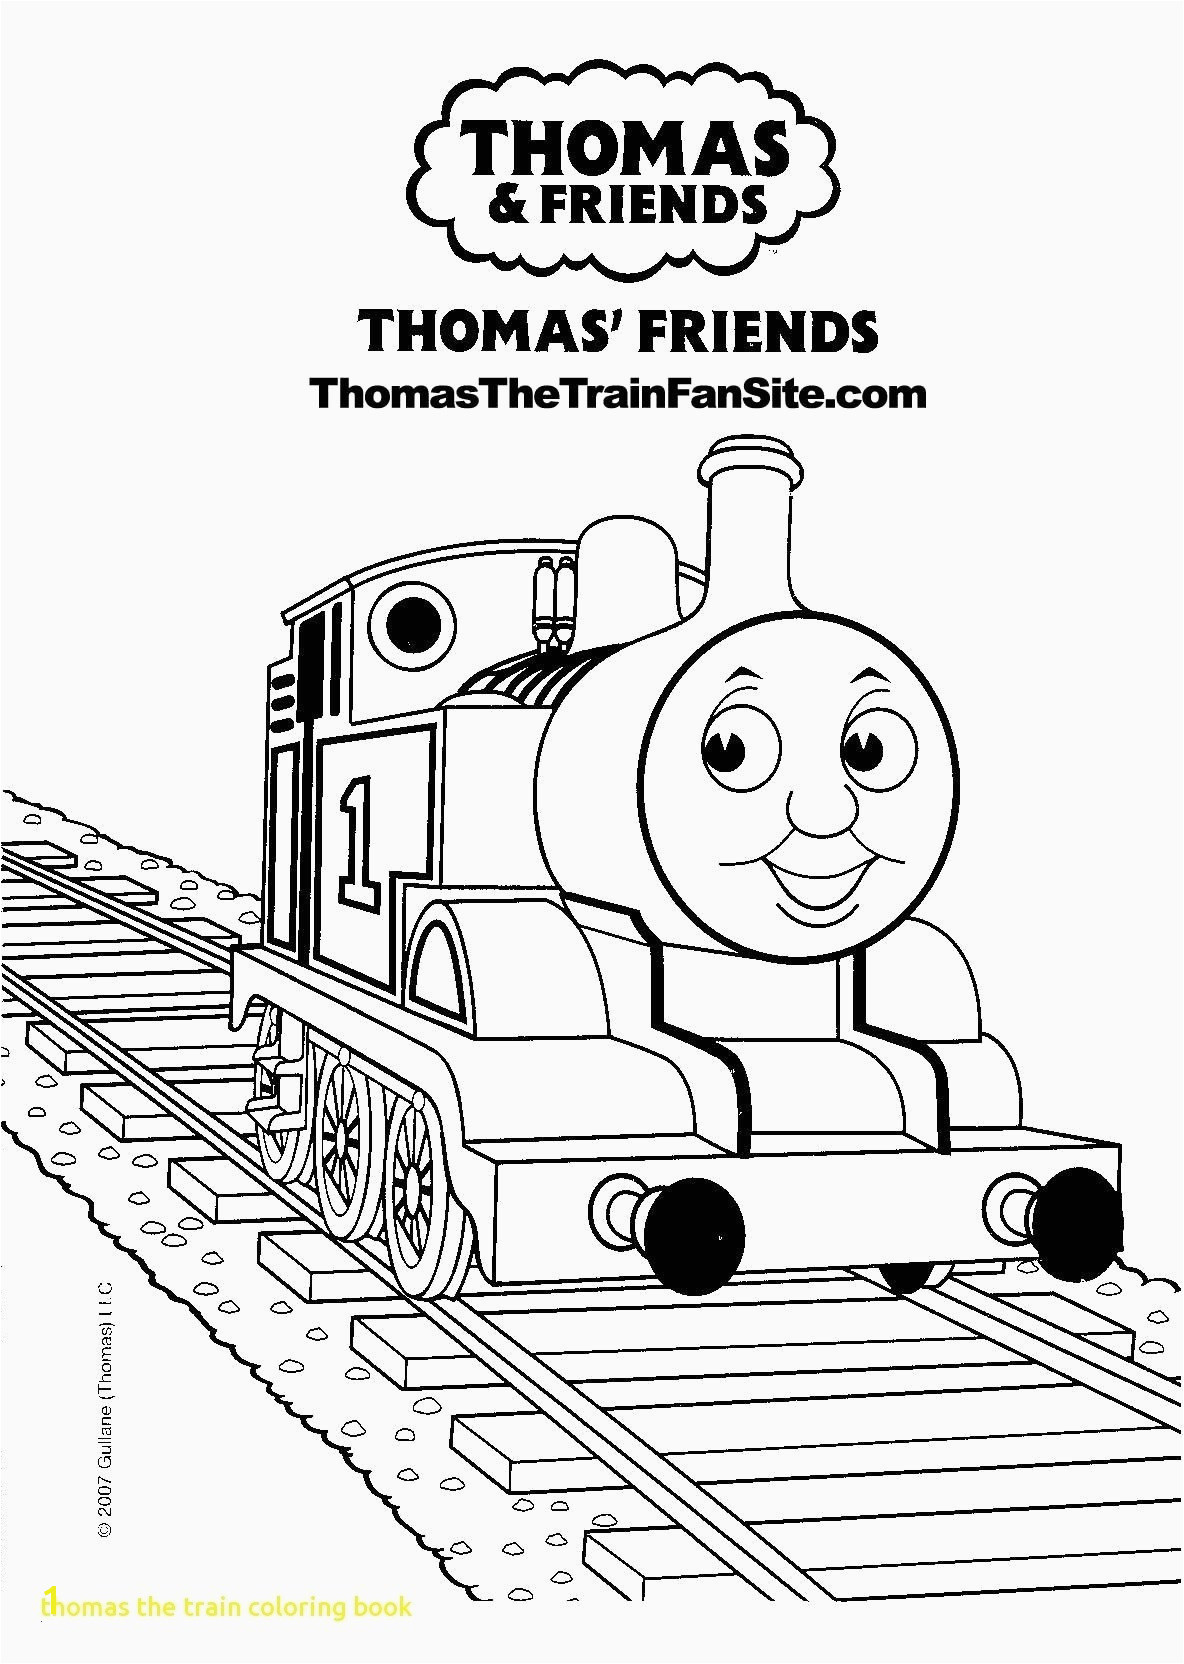 The Boxcar Children Coloring Pages Amazing Train Coloring Pages for toddlers Verikira